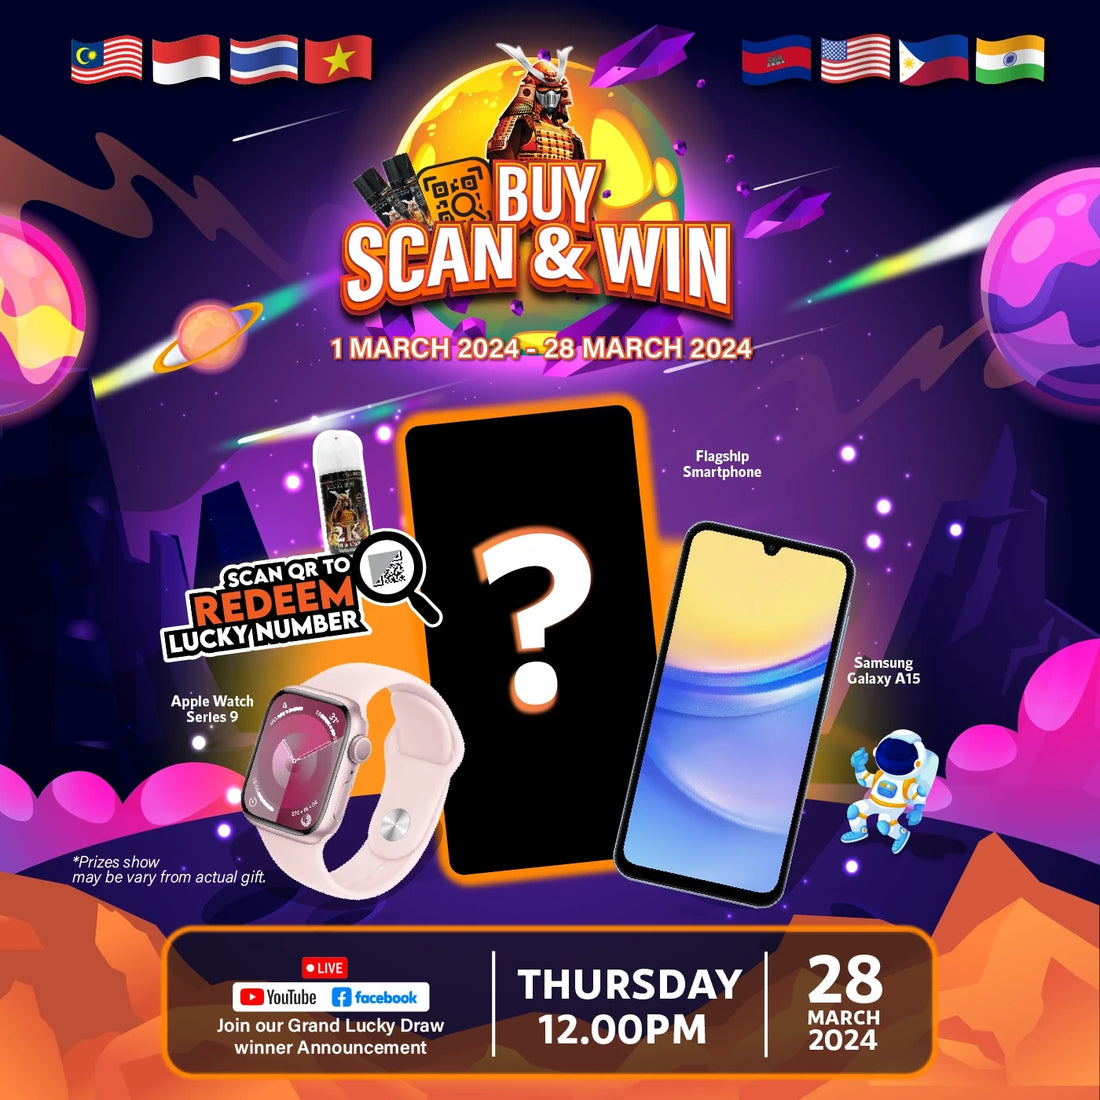 [ BUY, SCAN & WIN ] - Score an Exclusive Flagship Smartphone!